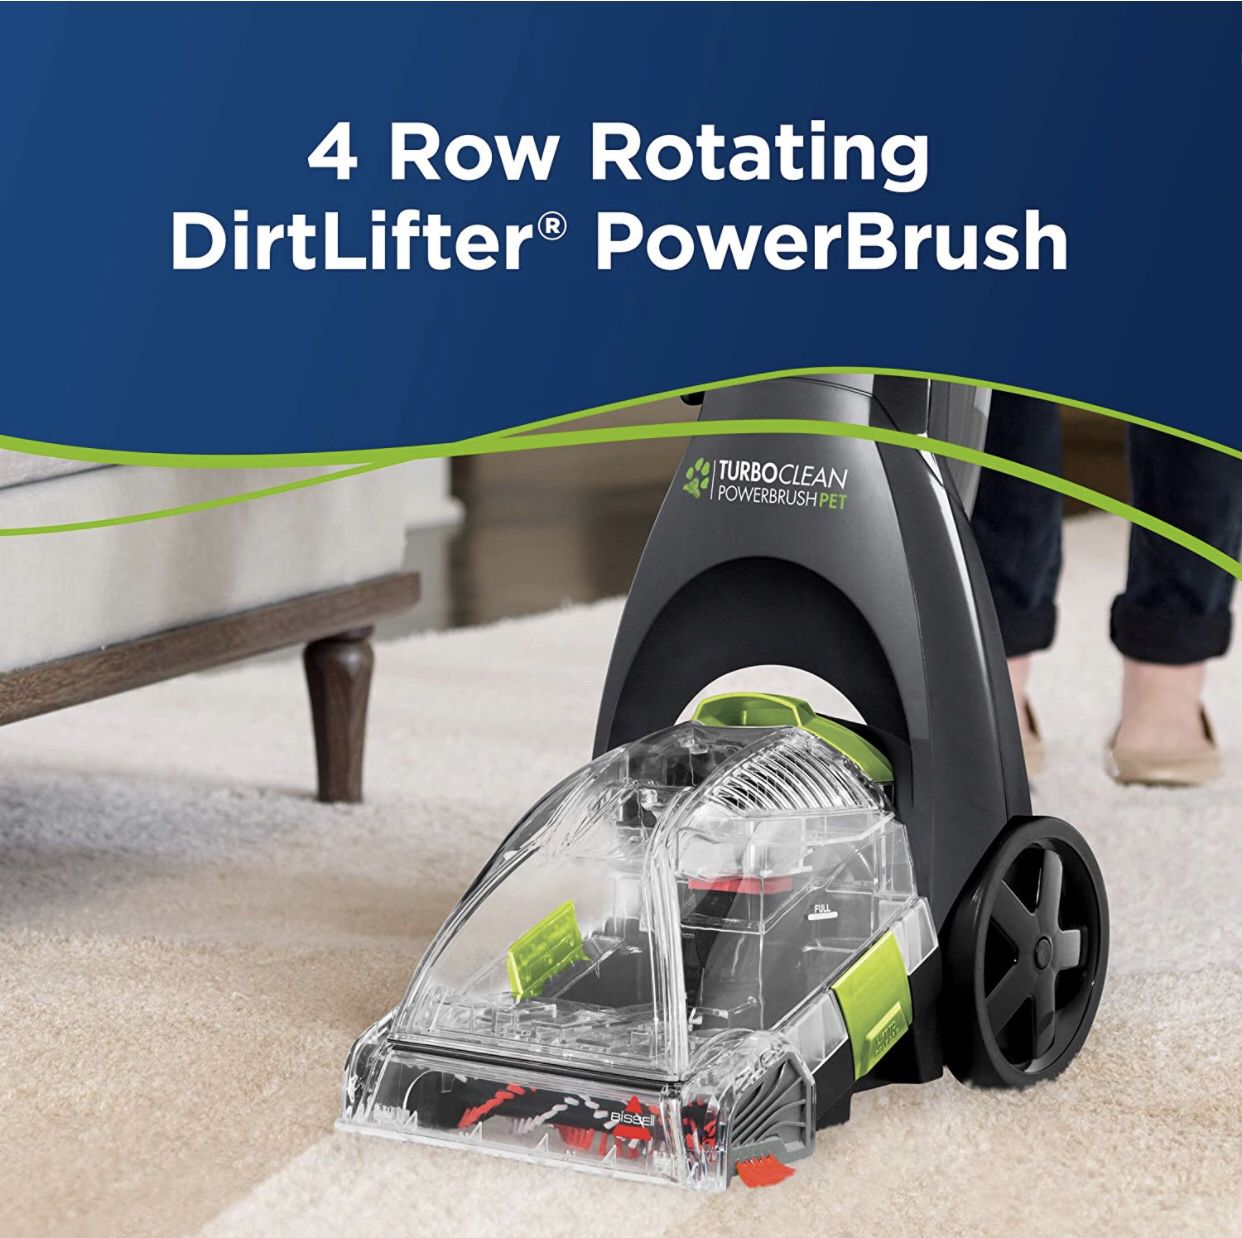 NEW! BISSELL Turboclean Powerbrush Pet Upright Carpet Cleaner Machine and Carpet Shampooer, 2085